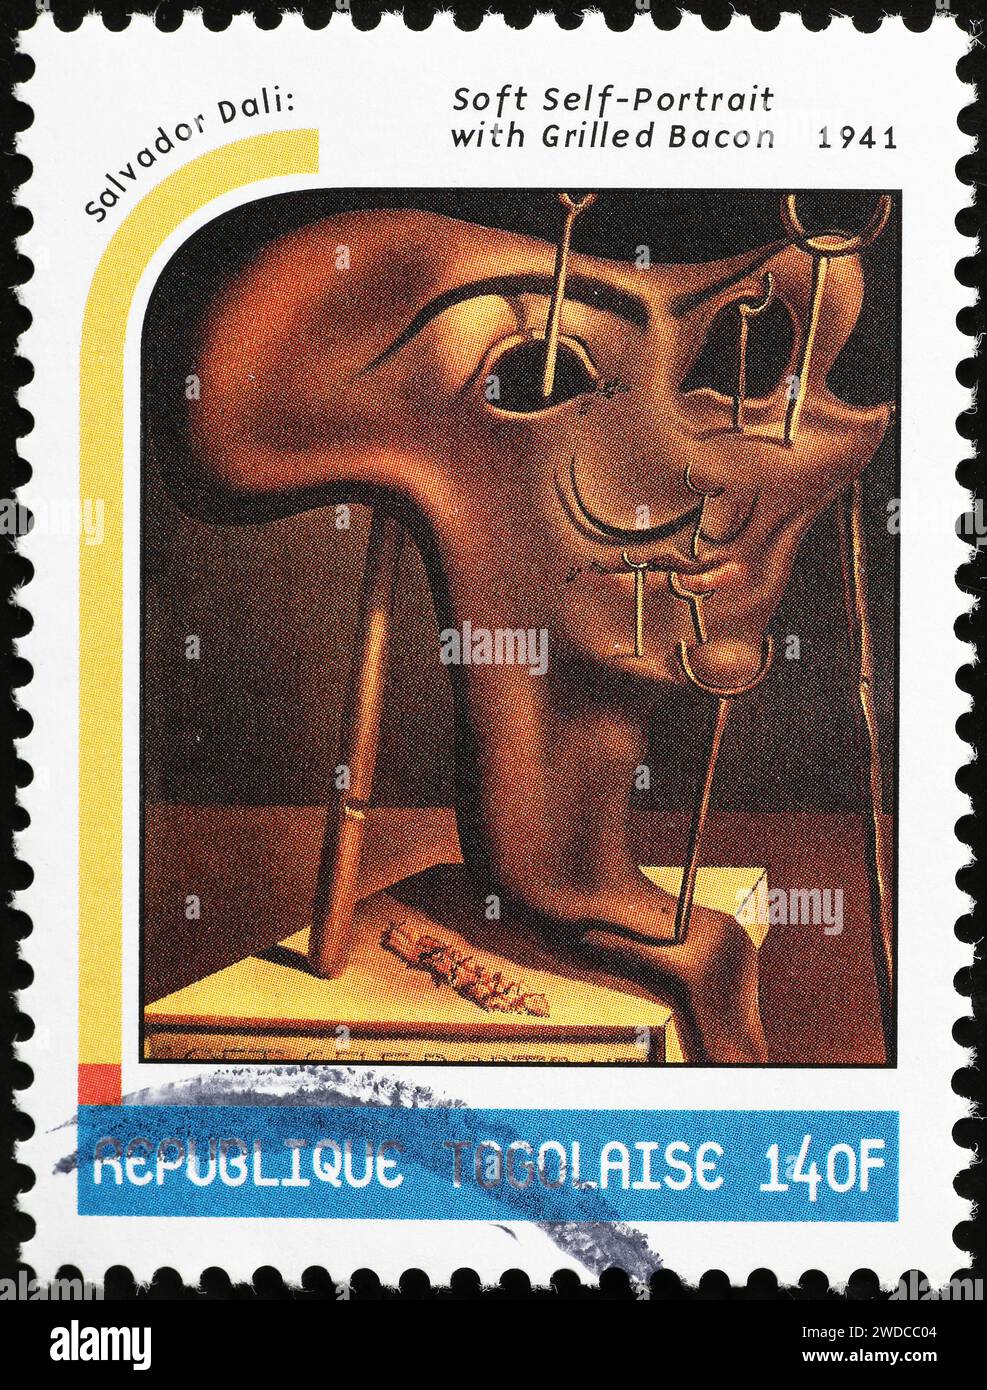 'Soft self-portraitnwith grilled bacon' by Salvador Dalì on stamp Stock Photo